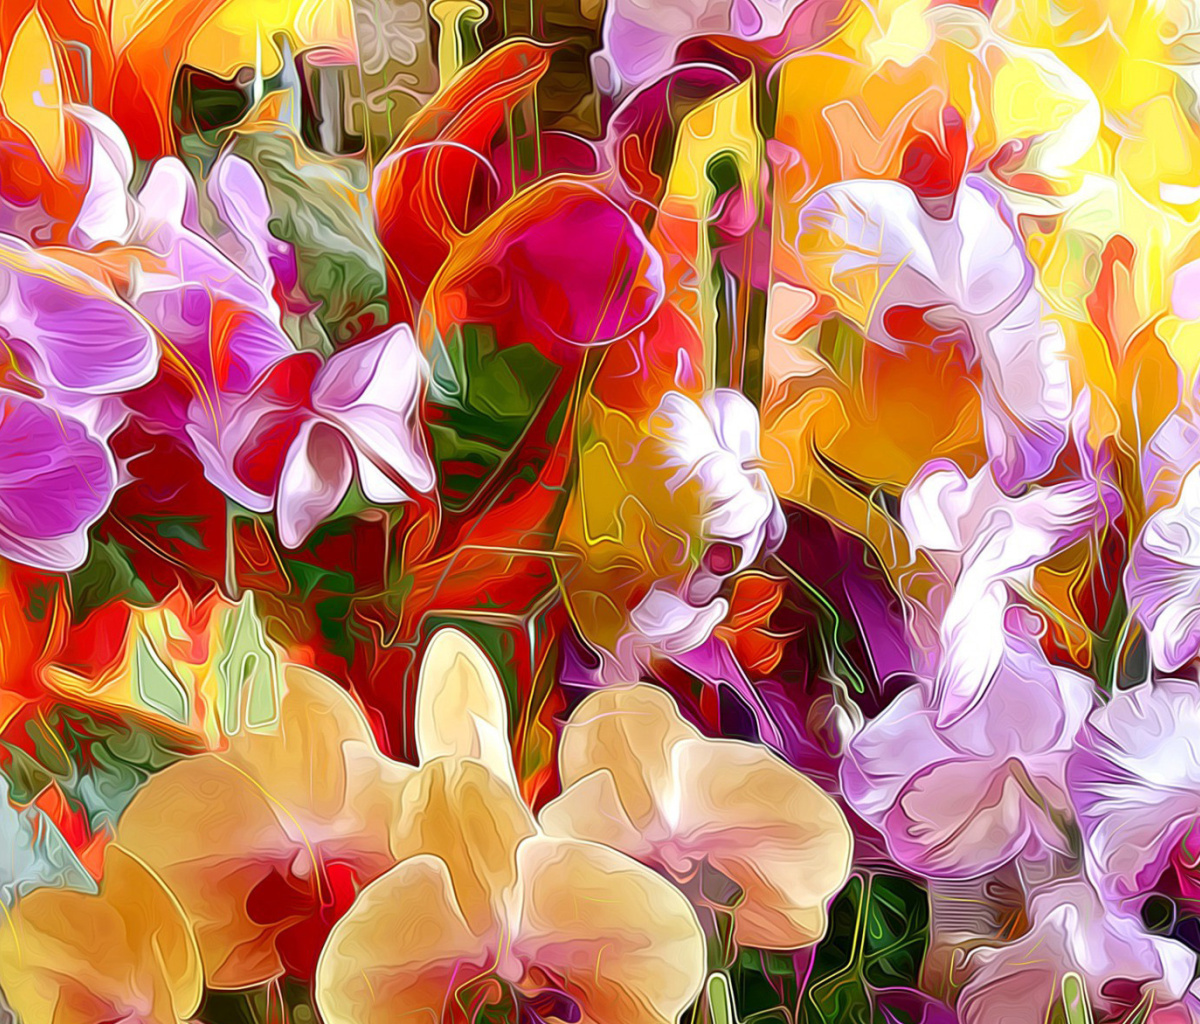 Beautiful flower drawn by oil color on canvas screenshot #1 1200x1024